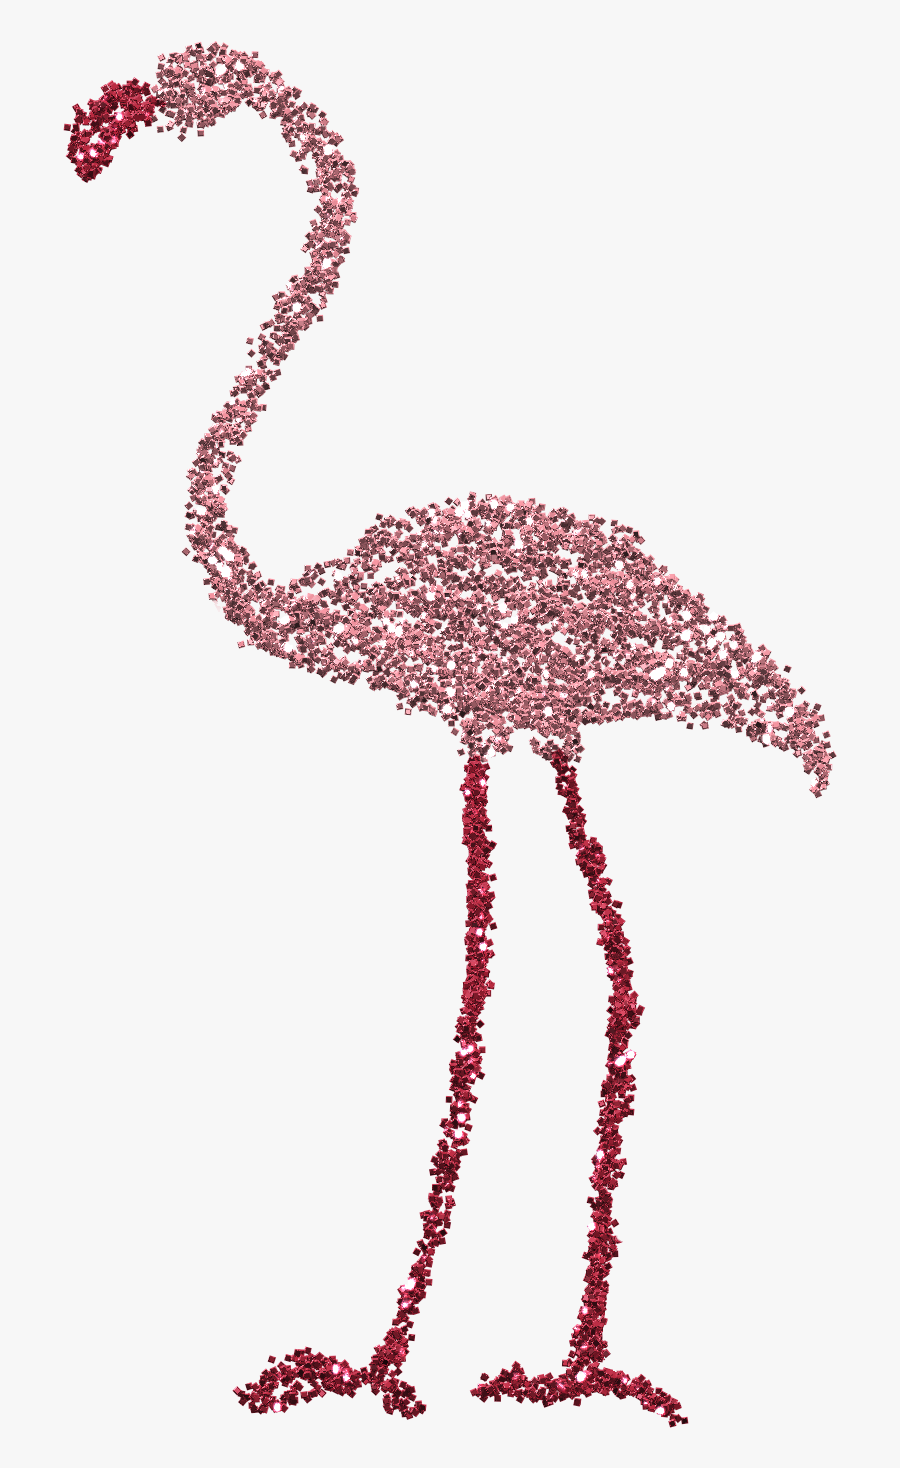 Lucy & I Spent The Afternoon "glittering - Glitter Flamingo, Transparent Clipart